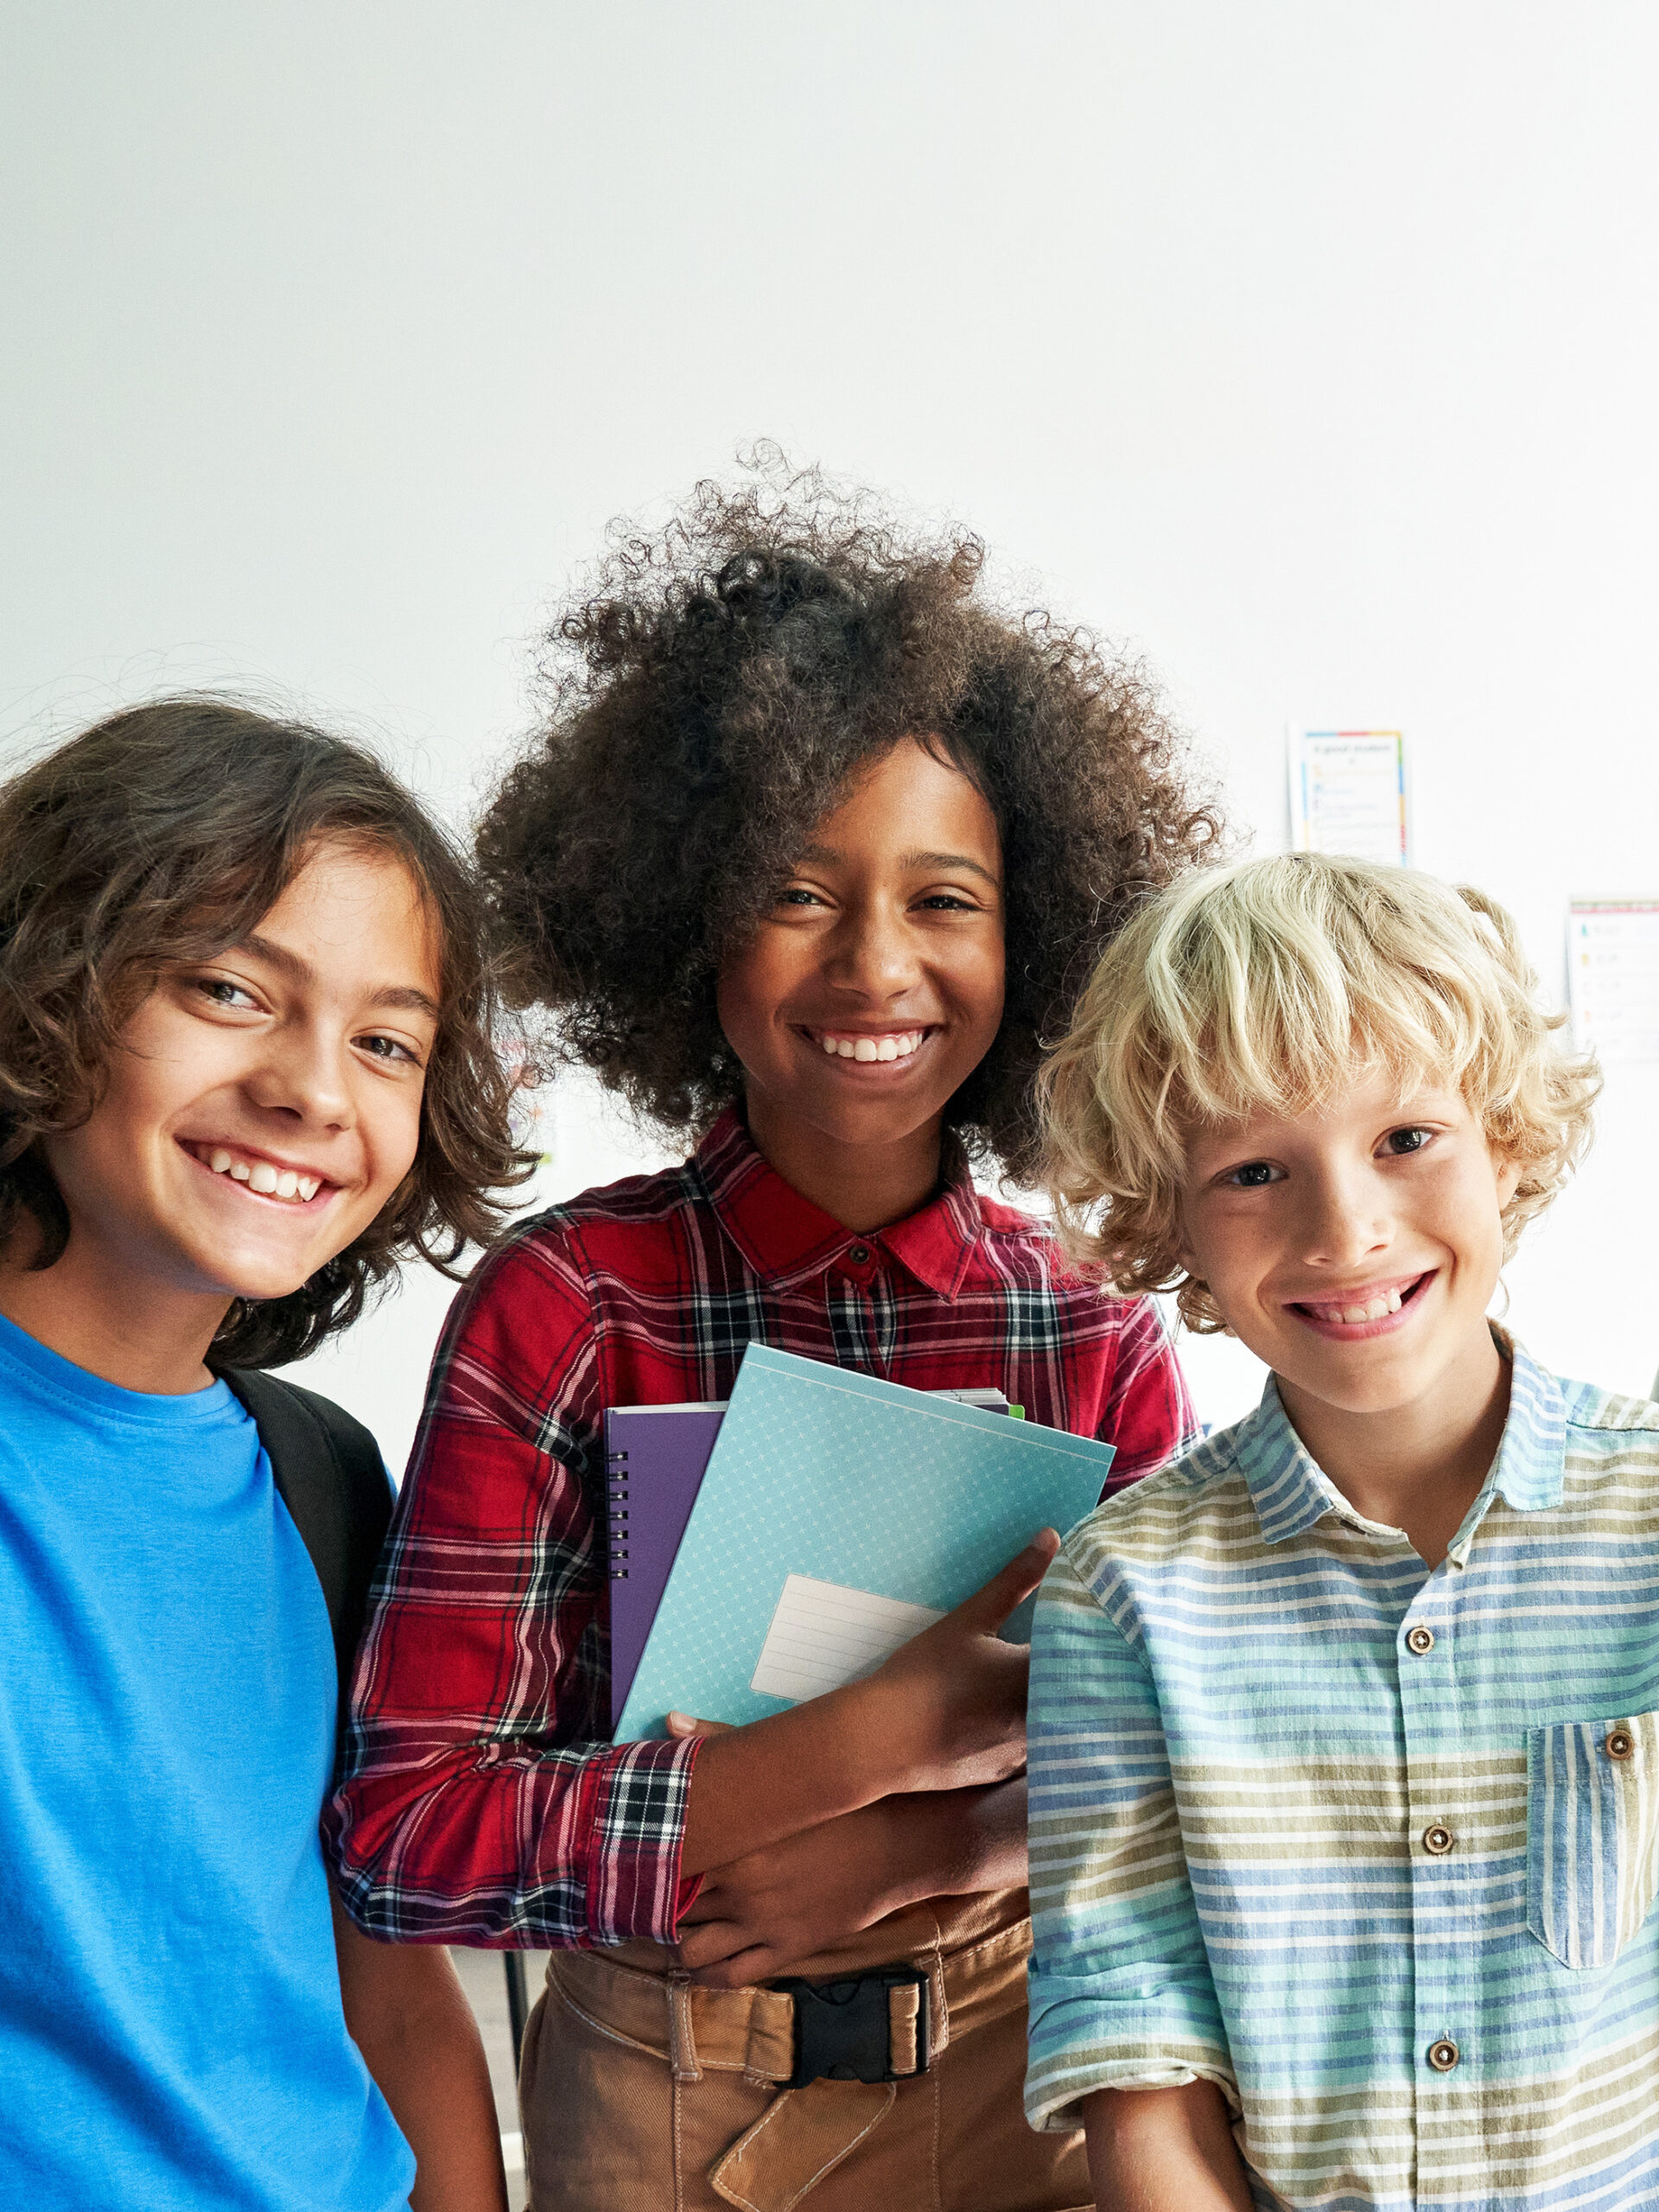 Three preteens smile together while at school - CHOC's tips for preteens and teens going through puberty